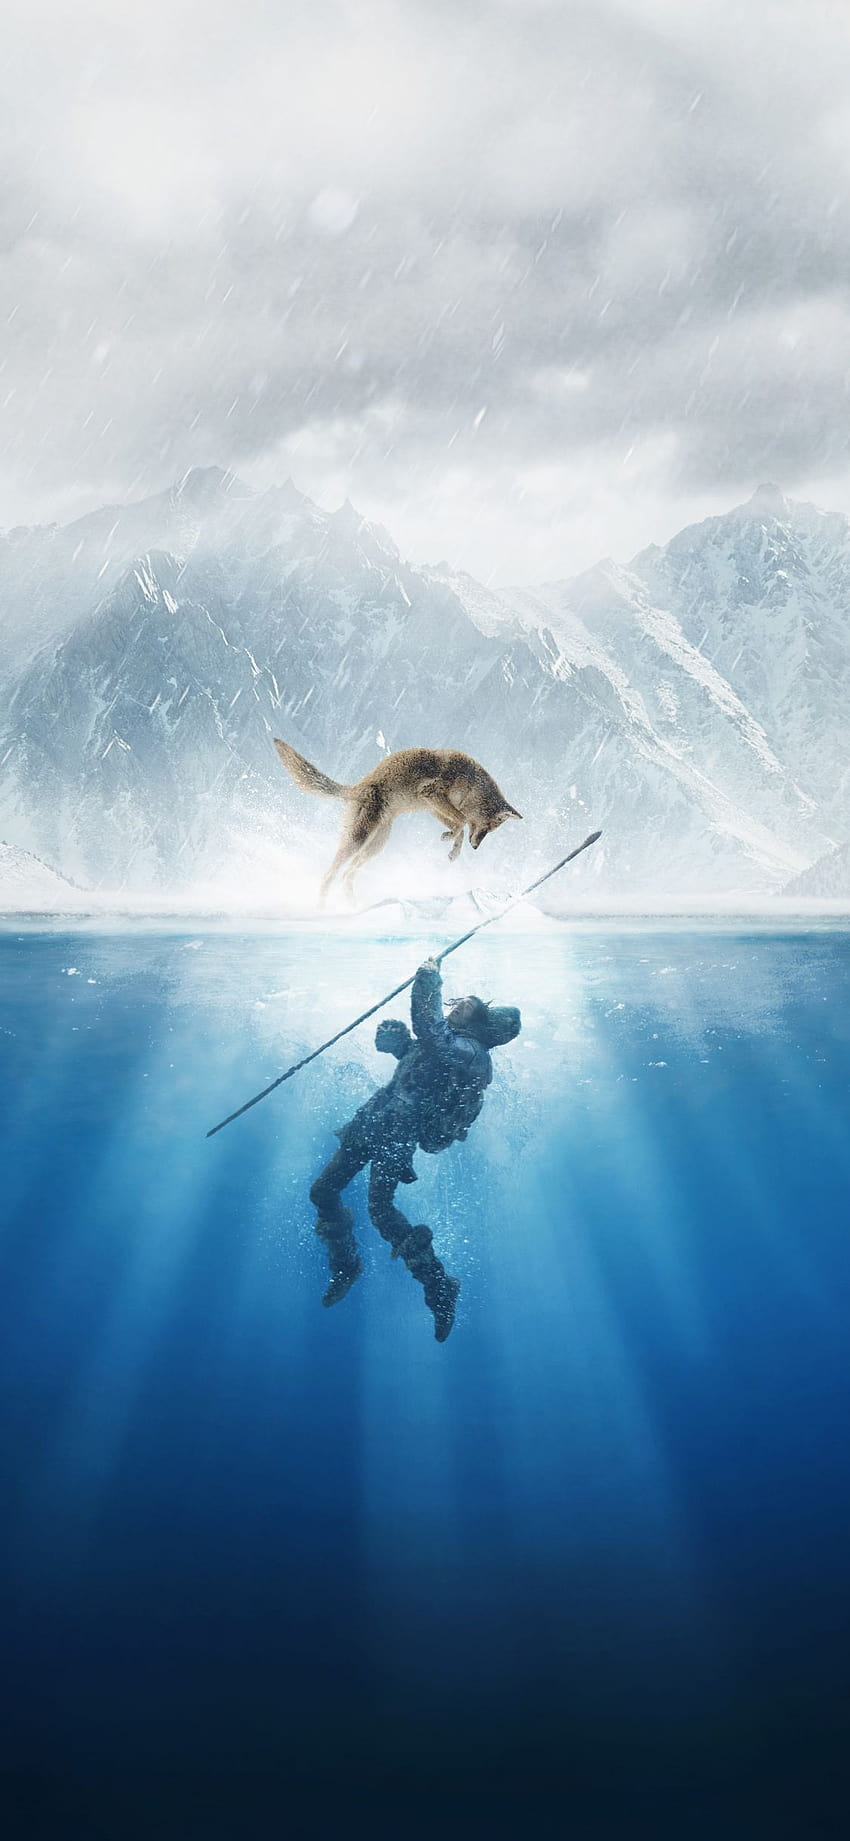 1125x2436 alpha, movie 2018, man and wolf, iphone x 1125x2436 , background, 14890, iphone scuba HD phone wallpaper